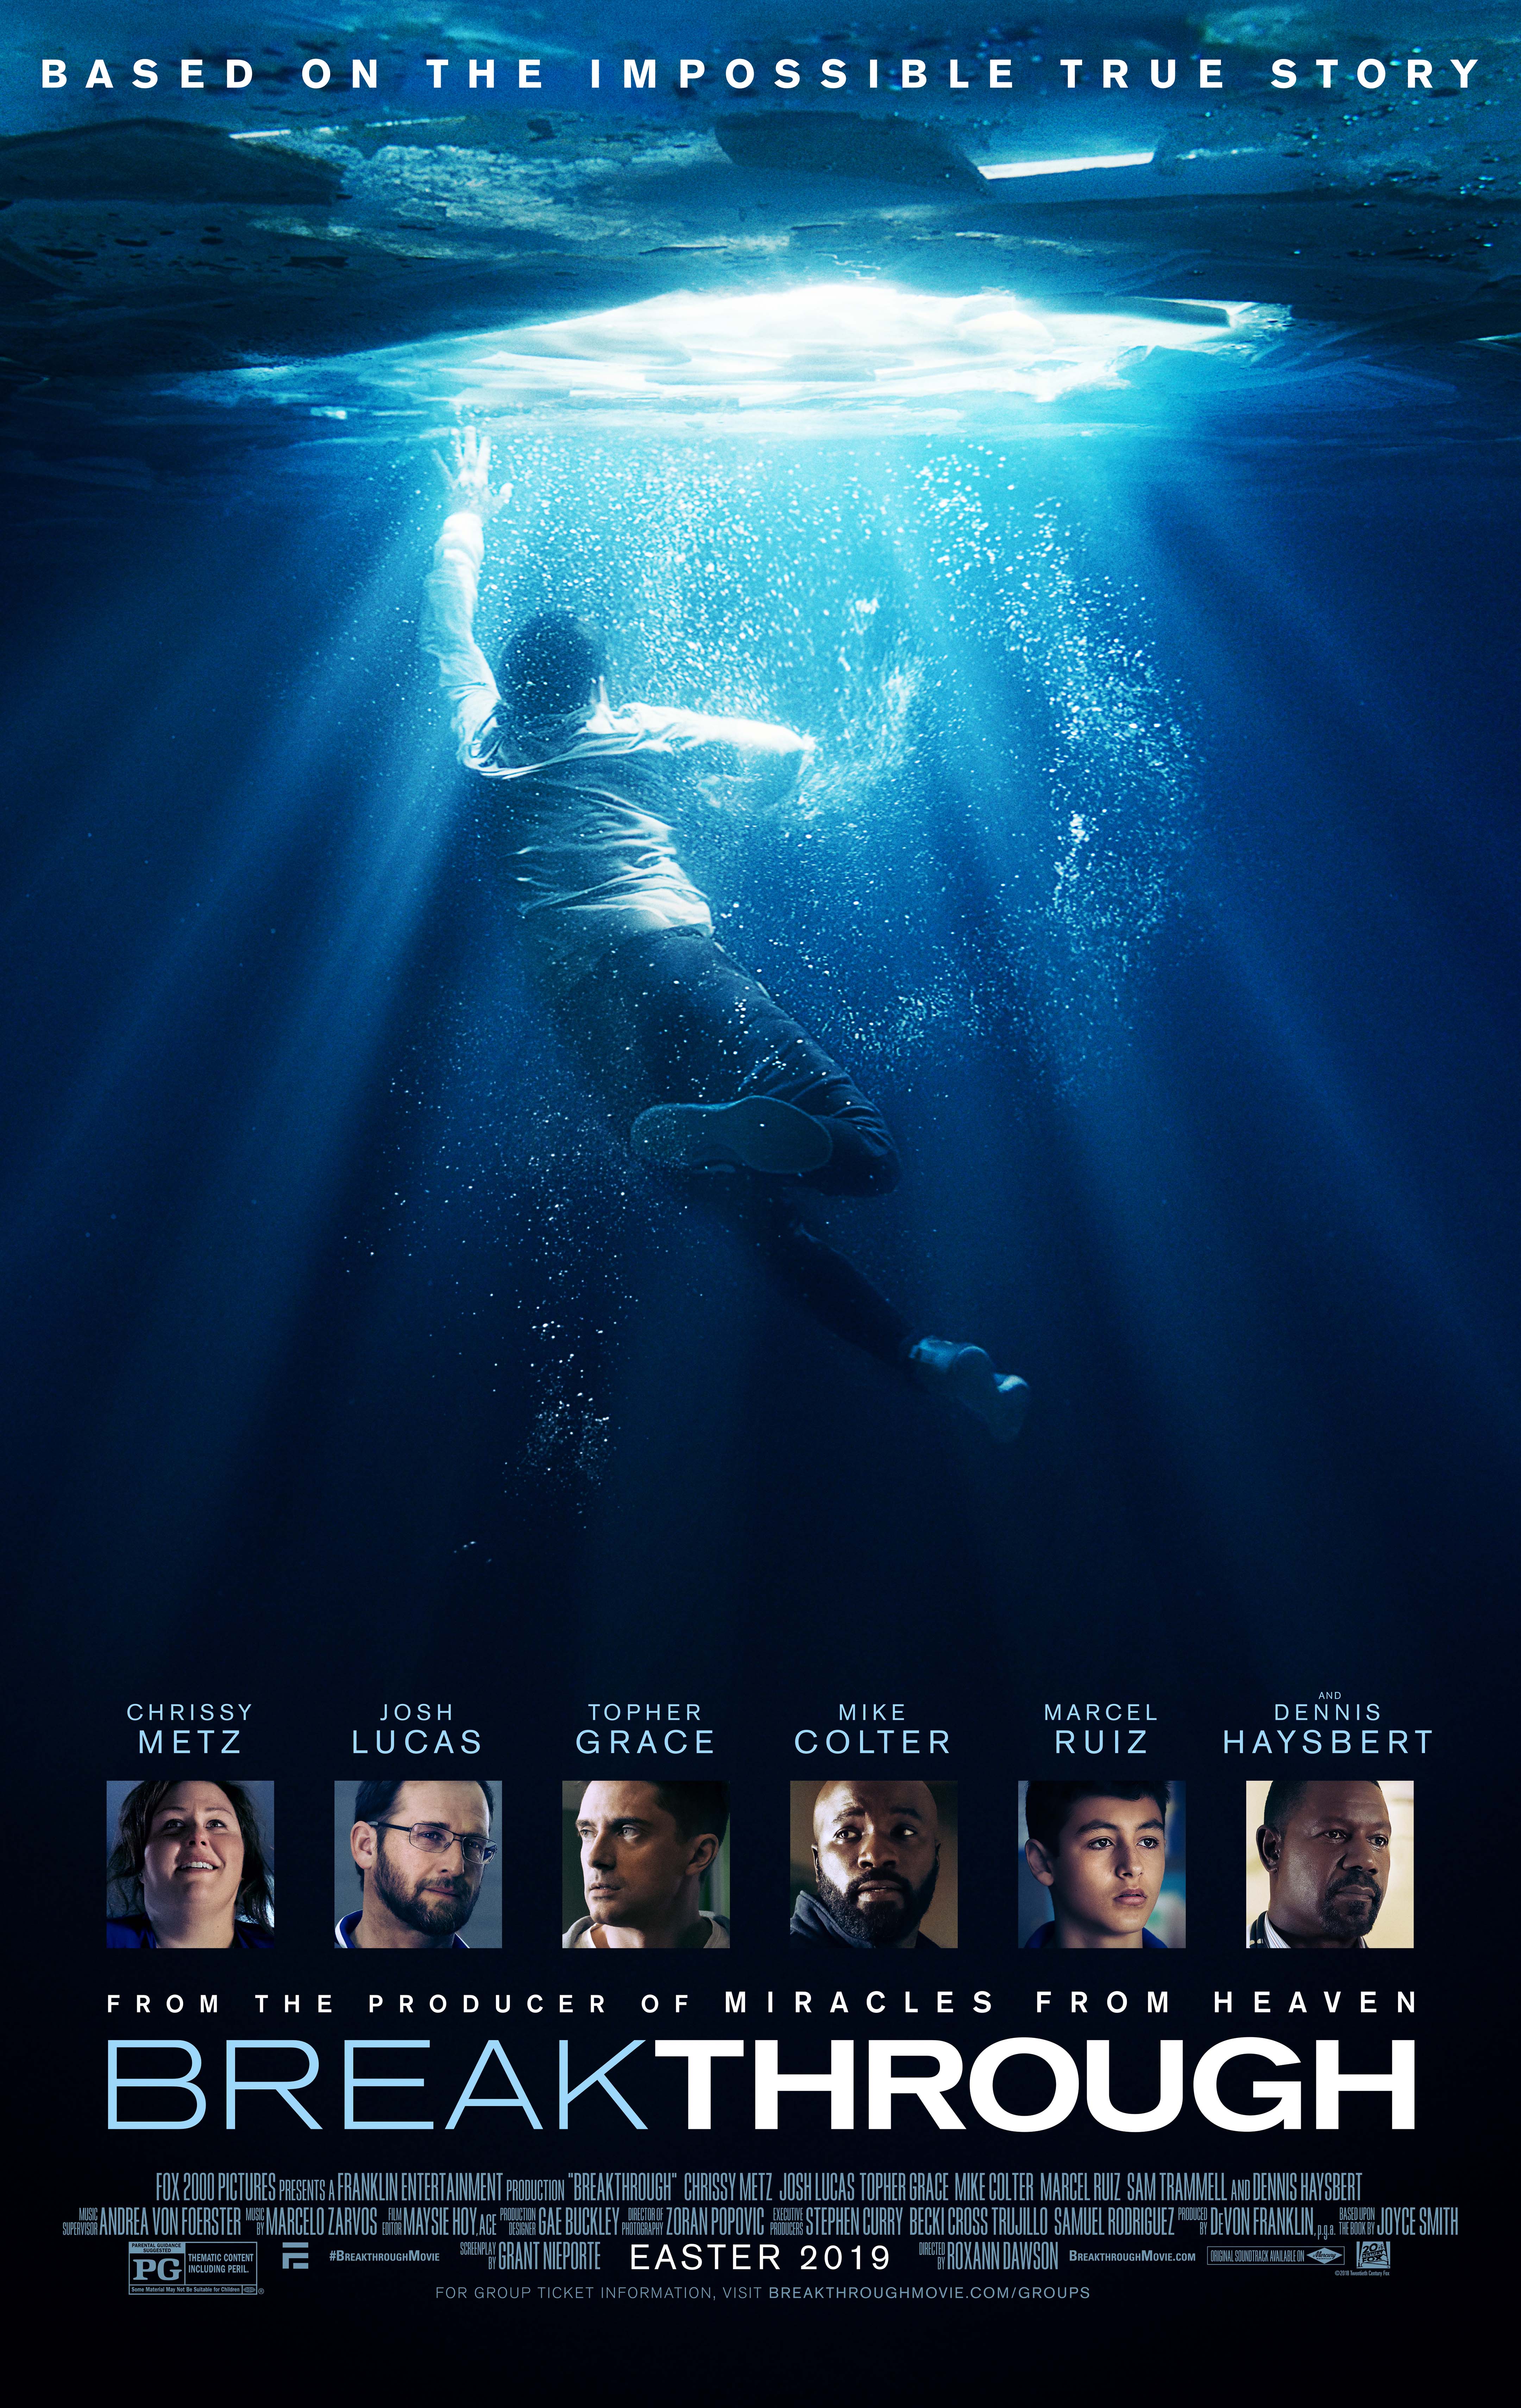 20th Century Fox Releases Trailer and Official Poster for Breakthrough